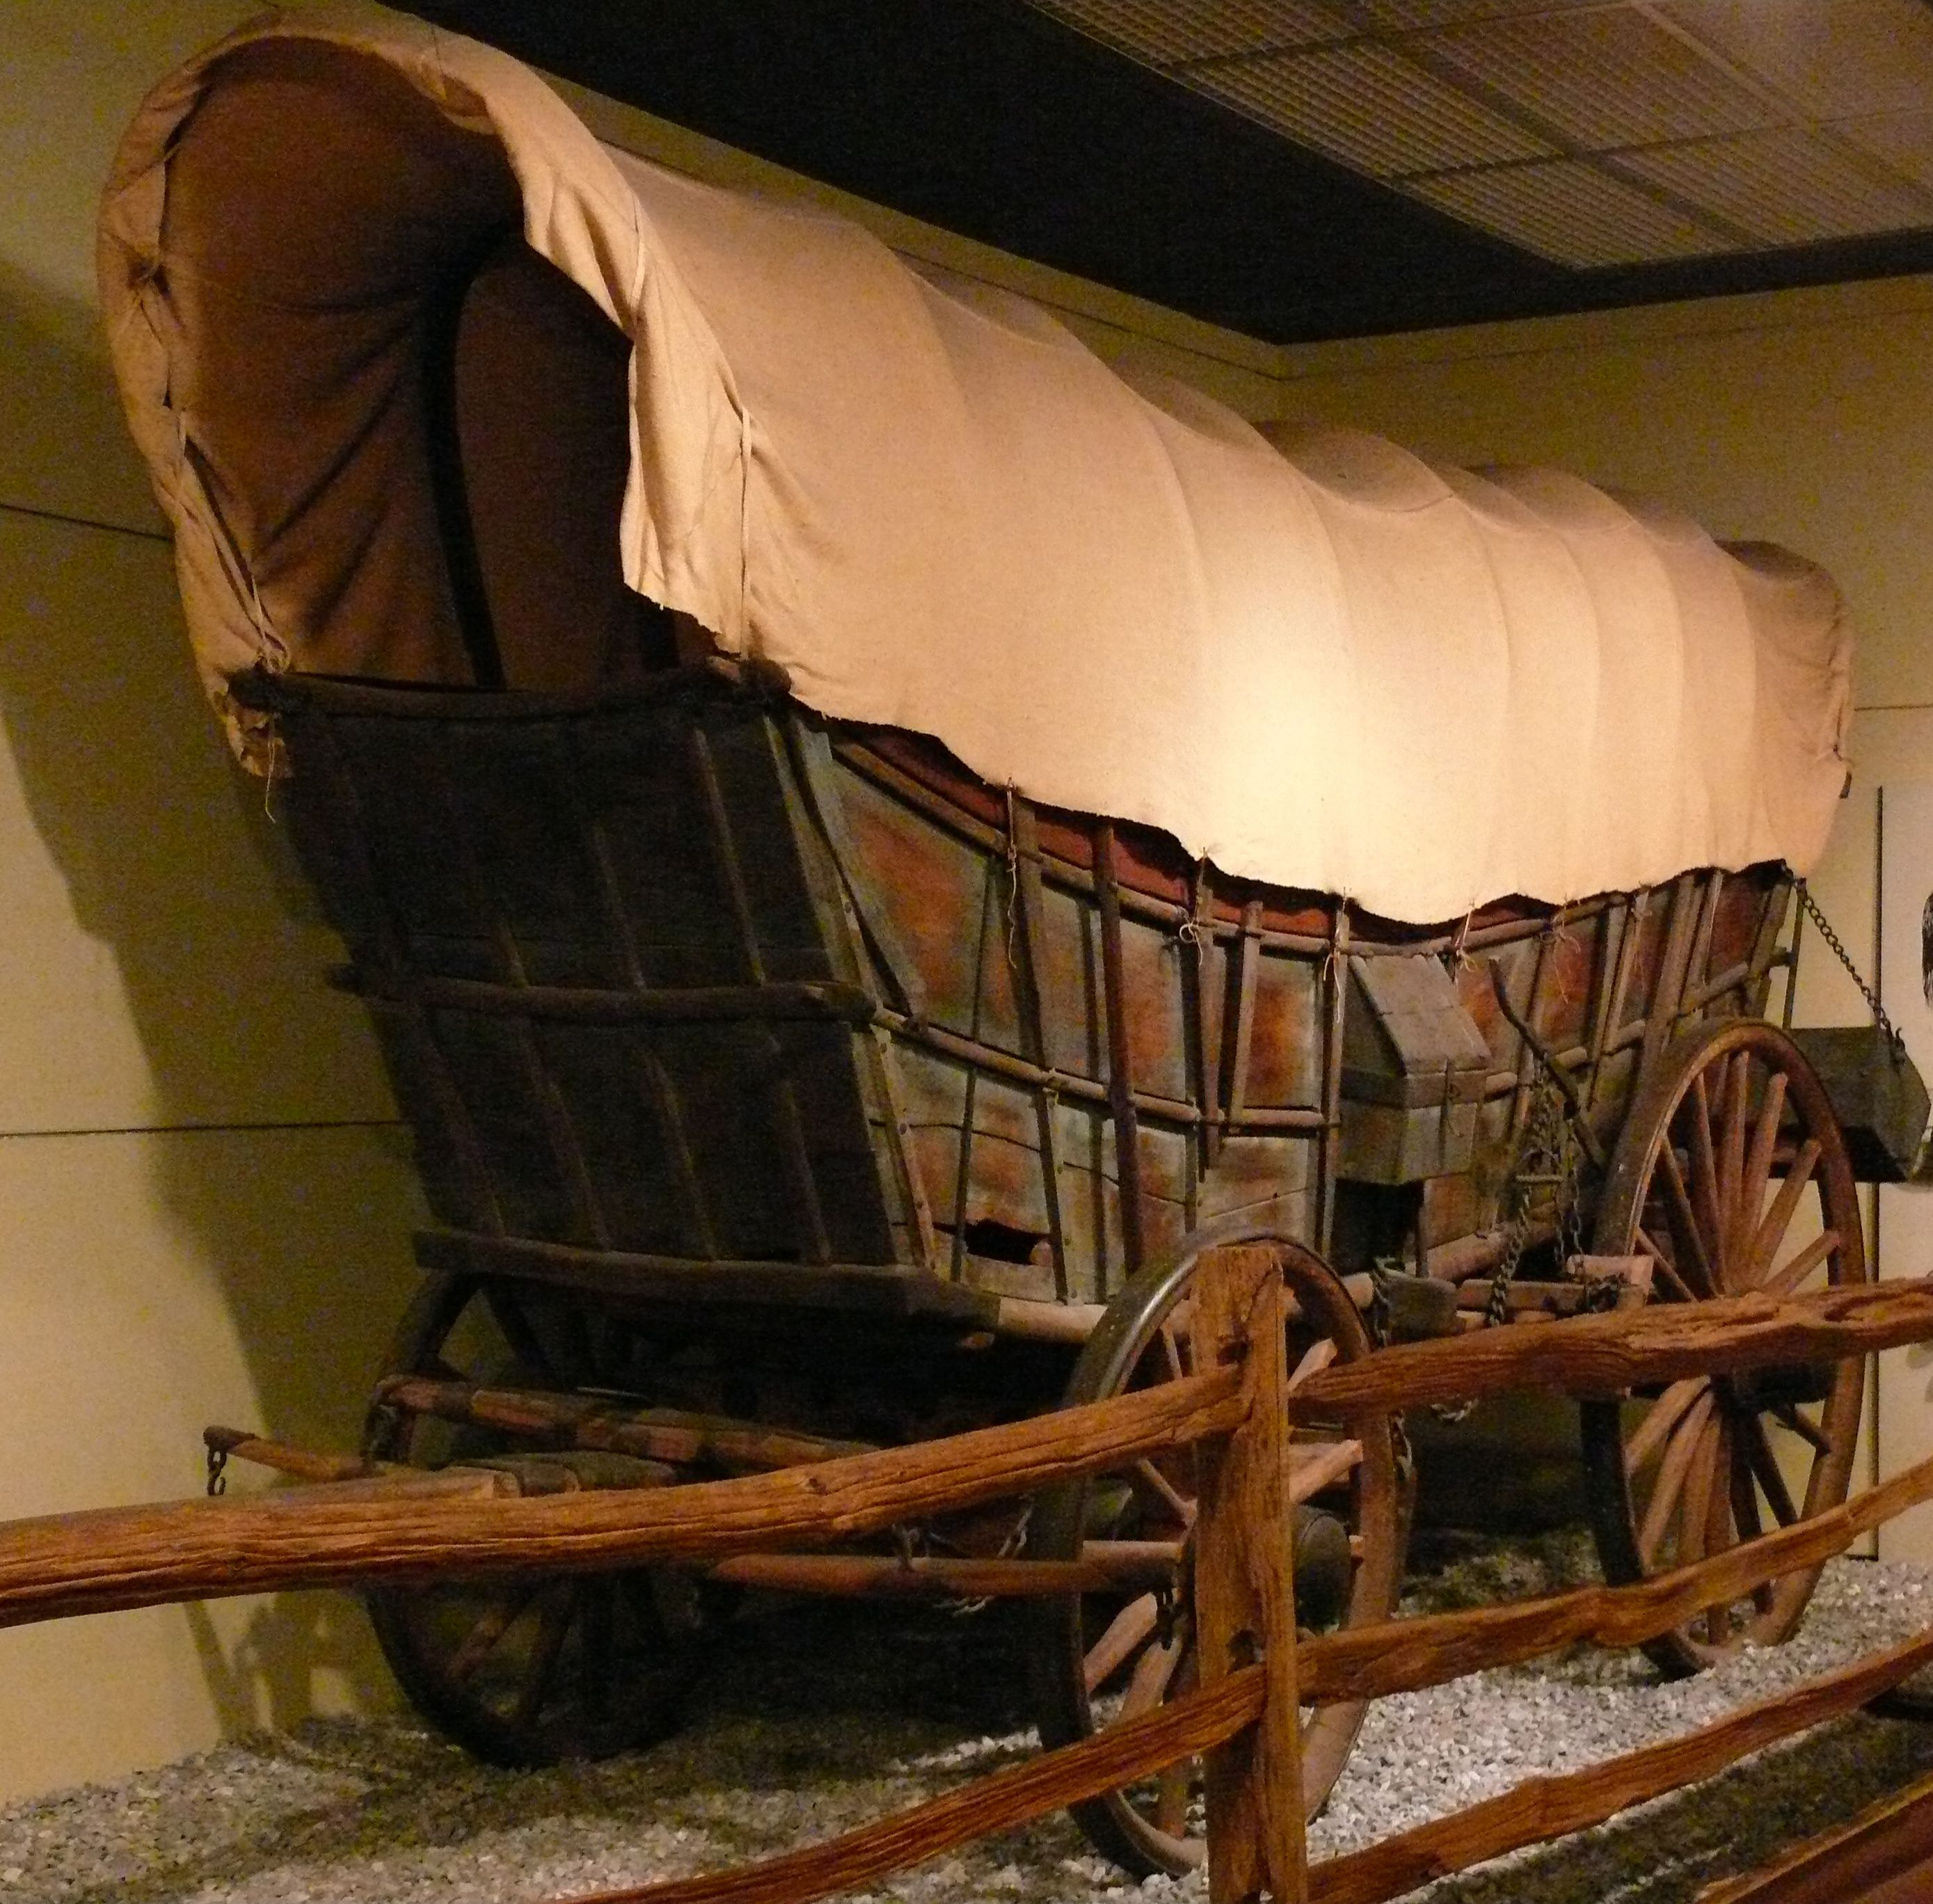 A parked Conestoag Wagon at the museum